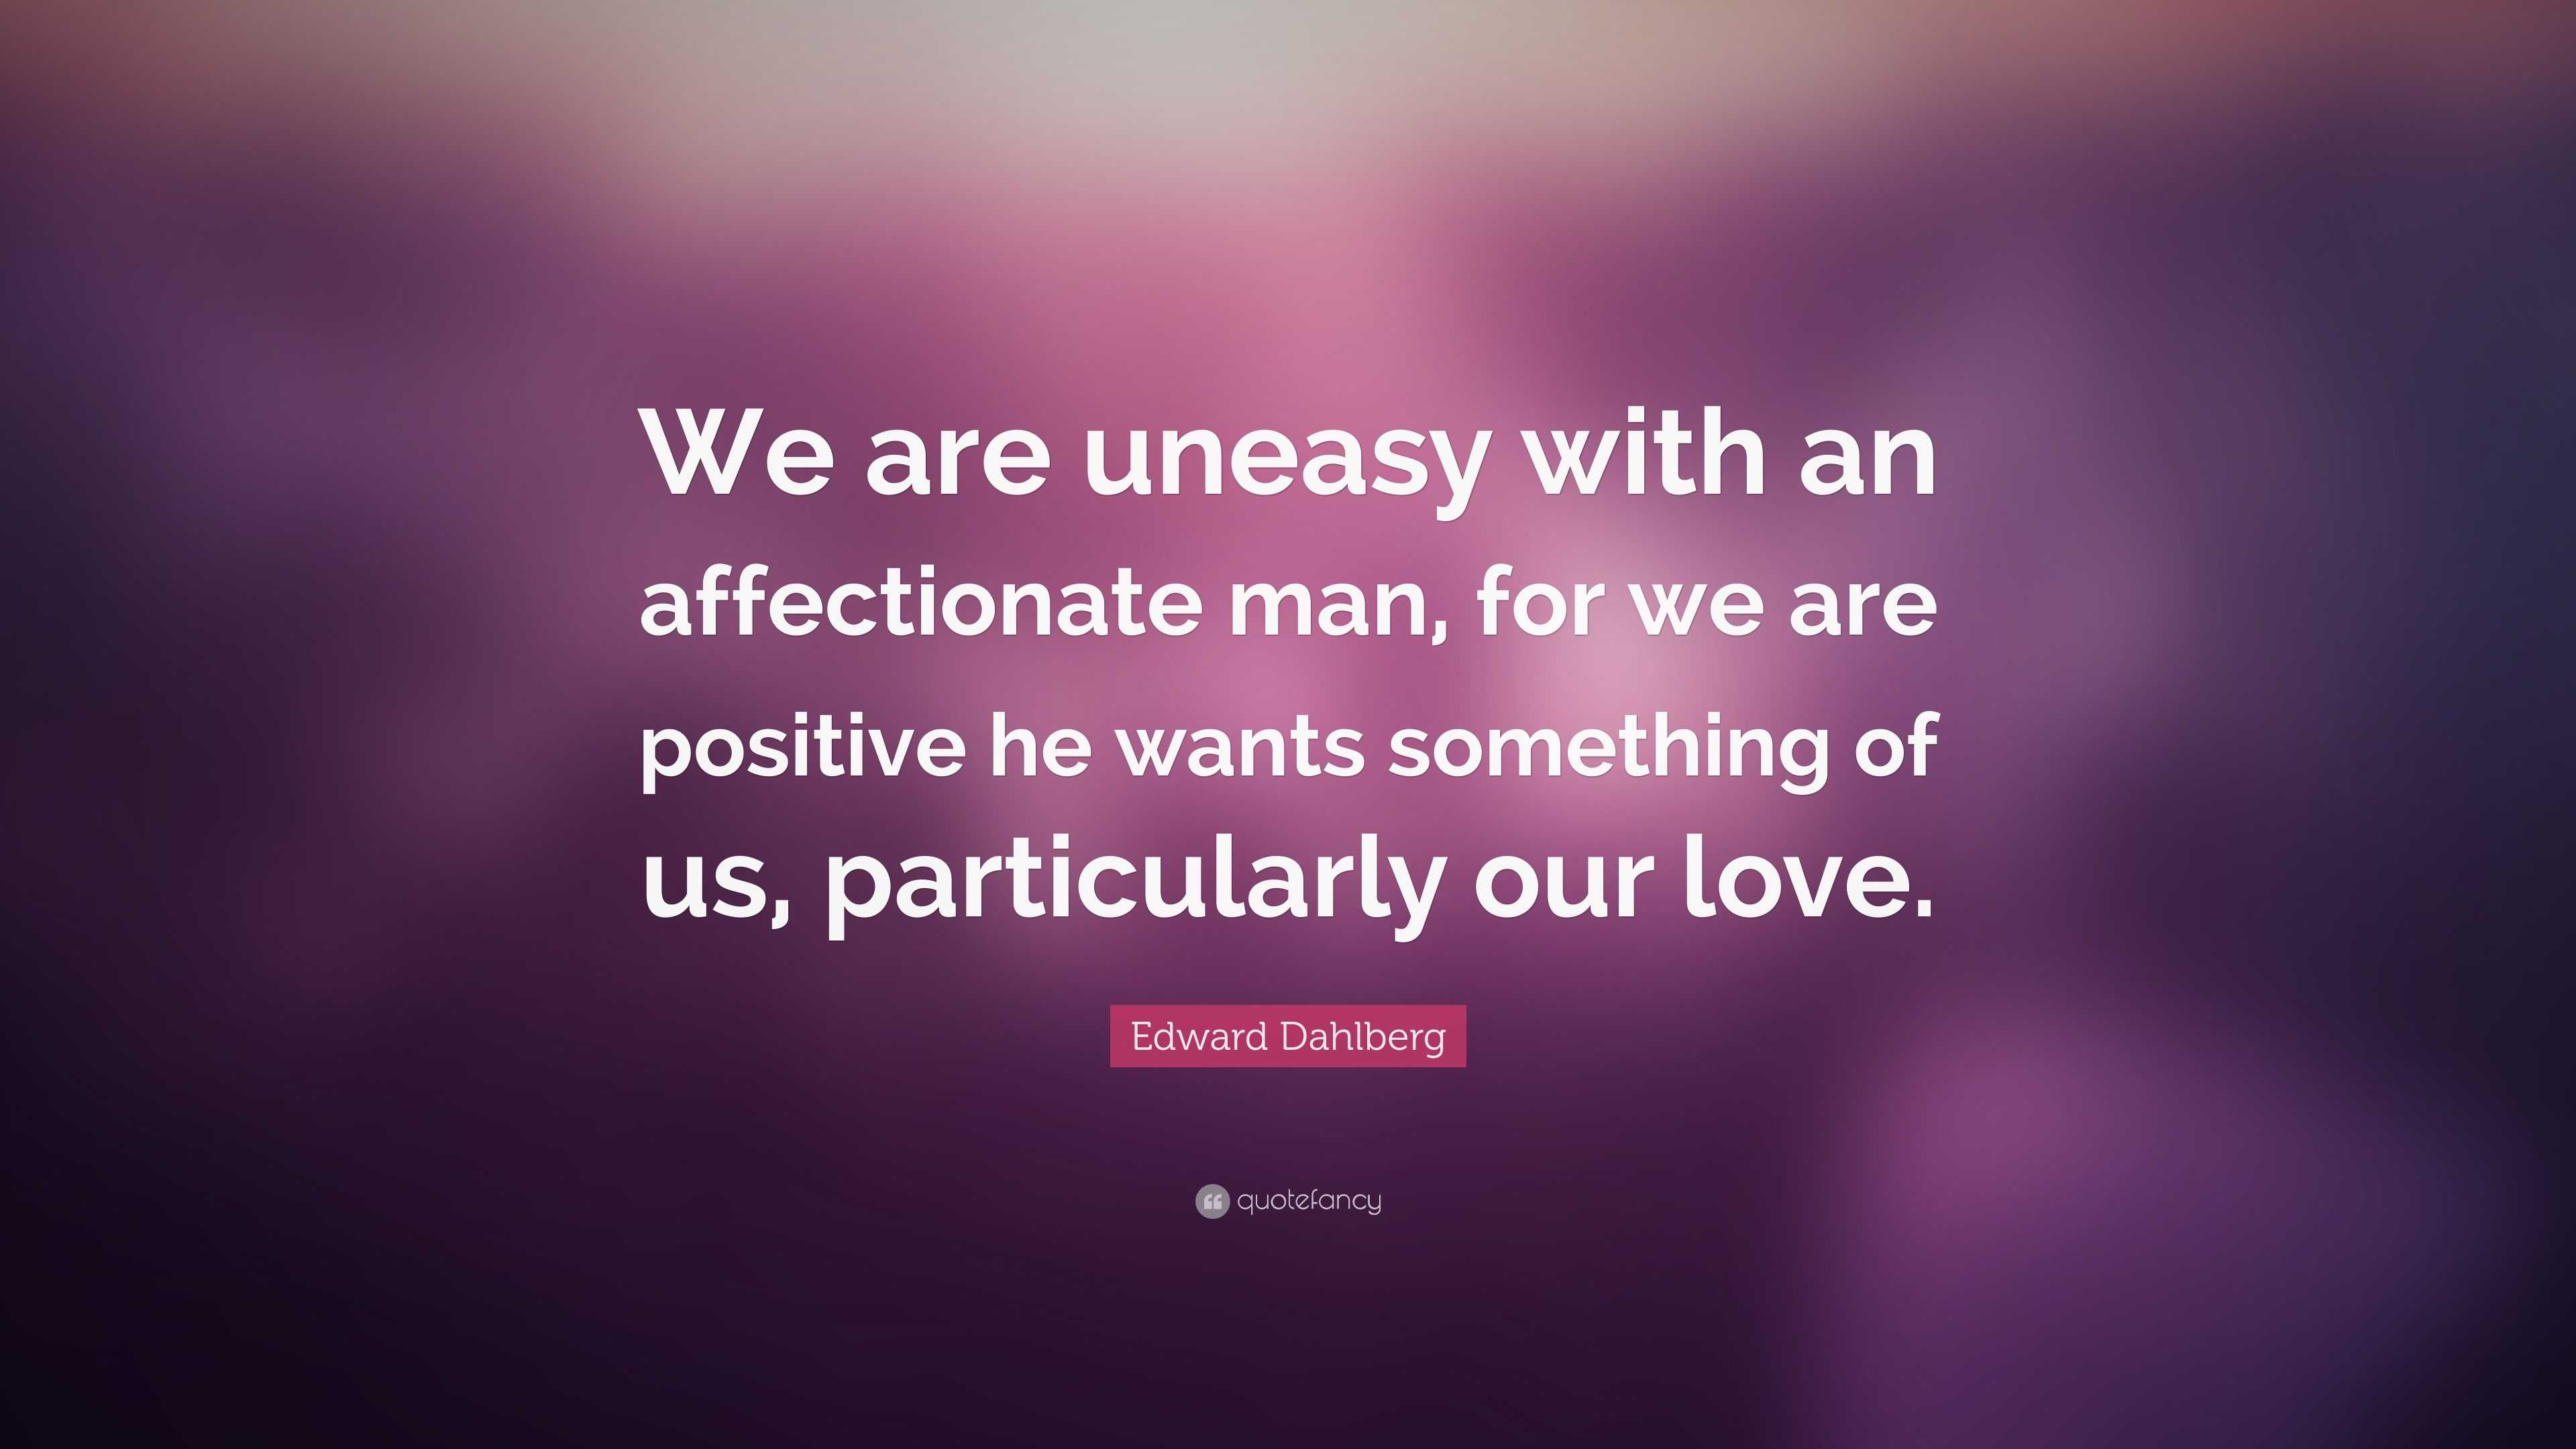 Edward Dahlberg Quote: “We are uneasy with an affectionate man, for we ...